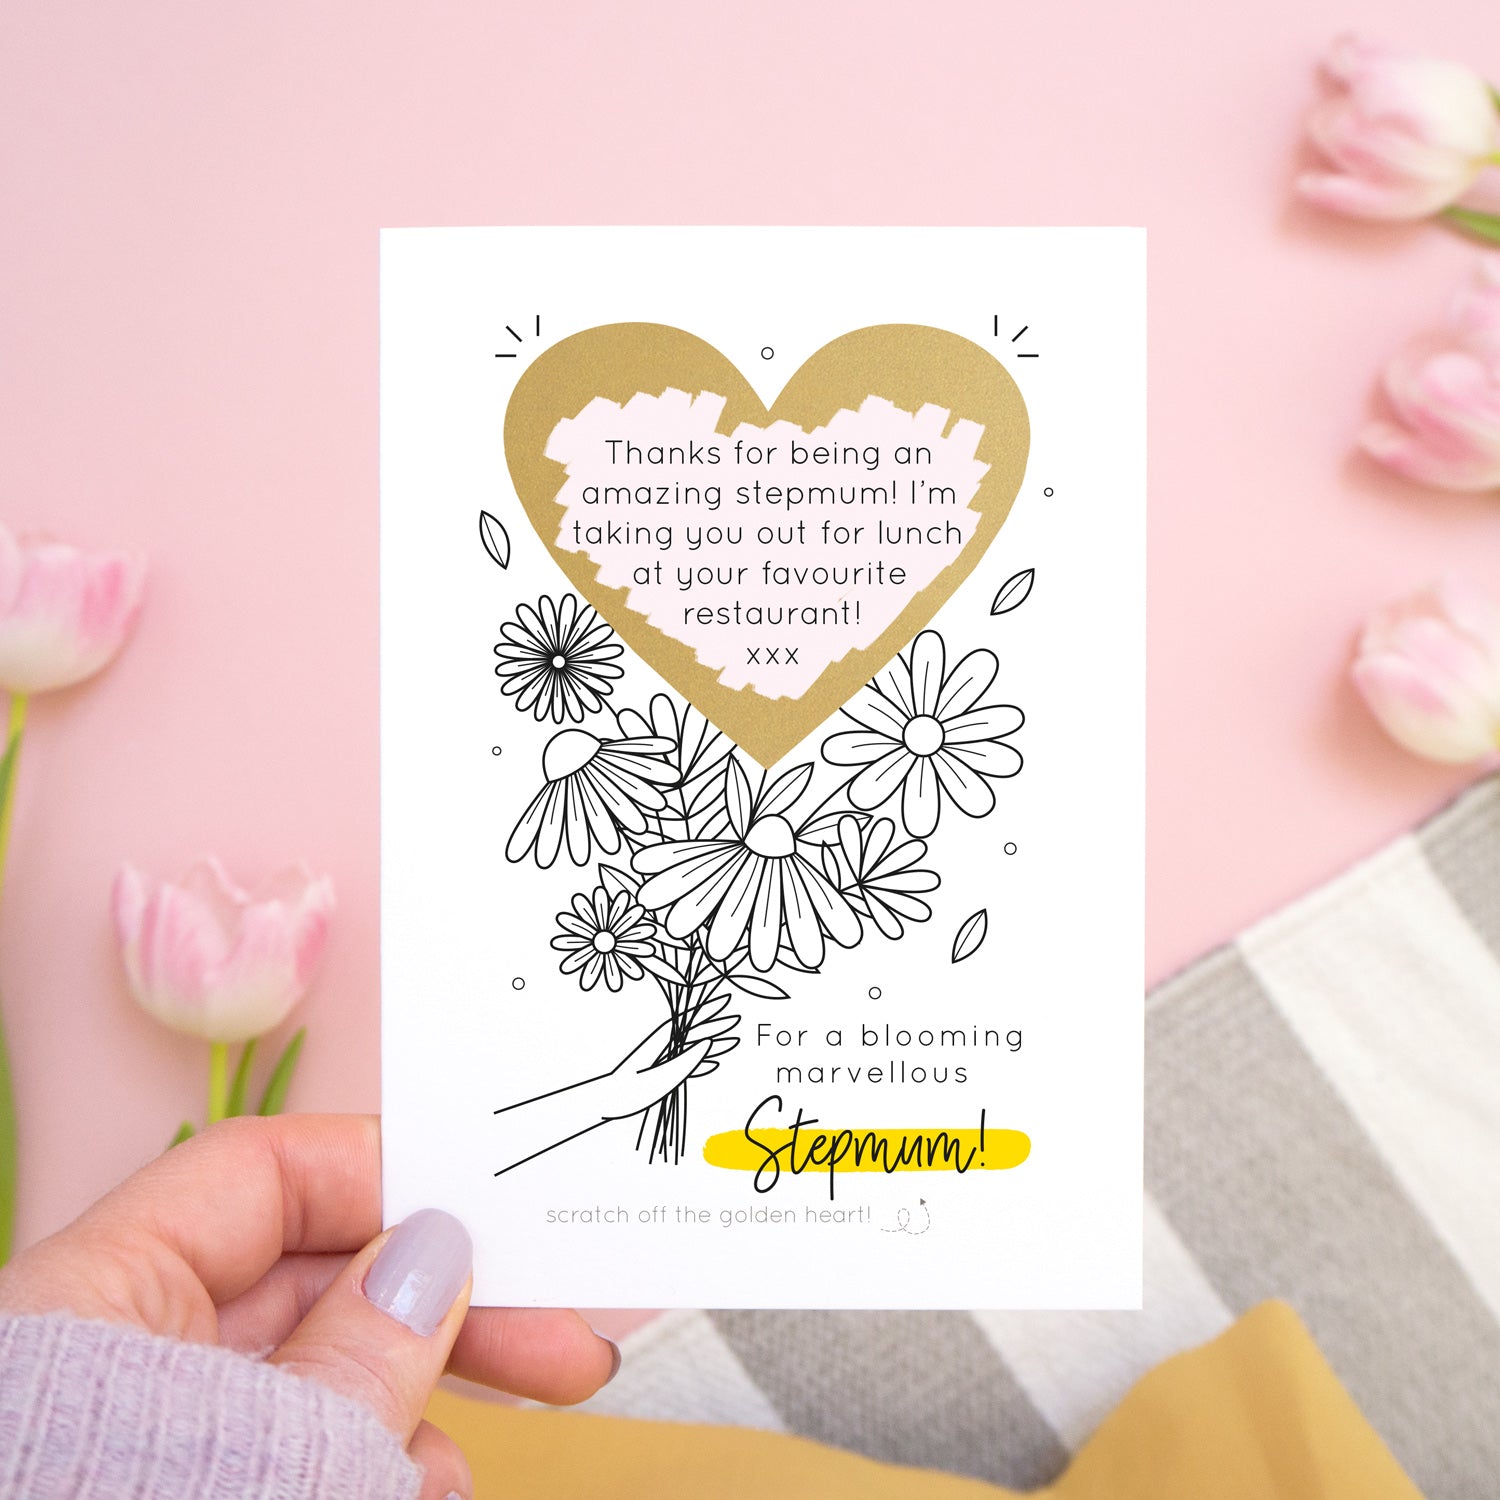 A personalised blooming marvellous scratch card being held above a pink background by someone in a yellow skirt over a grey and white rug. There are pink tulips around the edge of the photo. The card features the black and yellow colour way with the scratch off heart revealing the custom printed message.